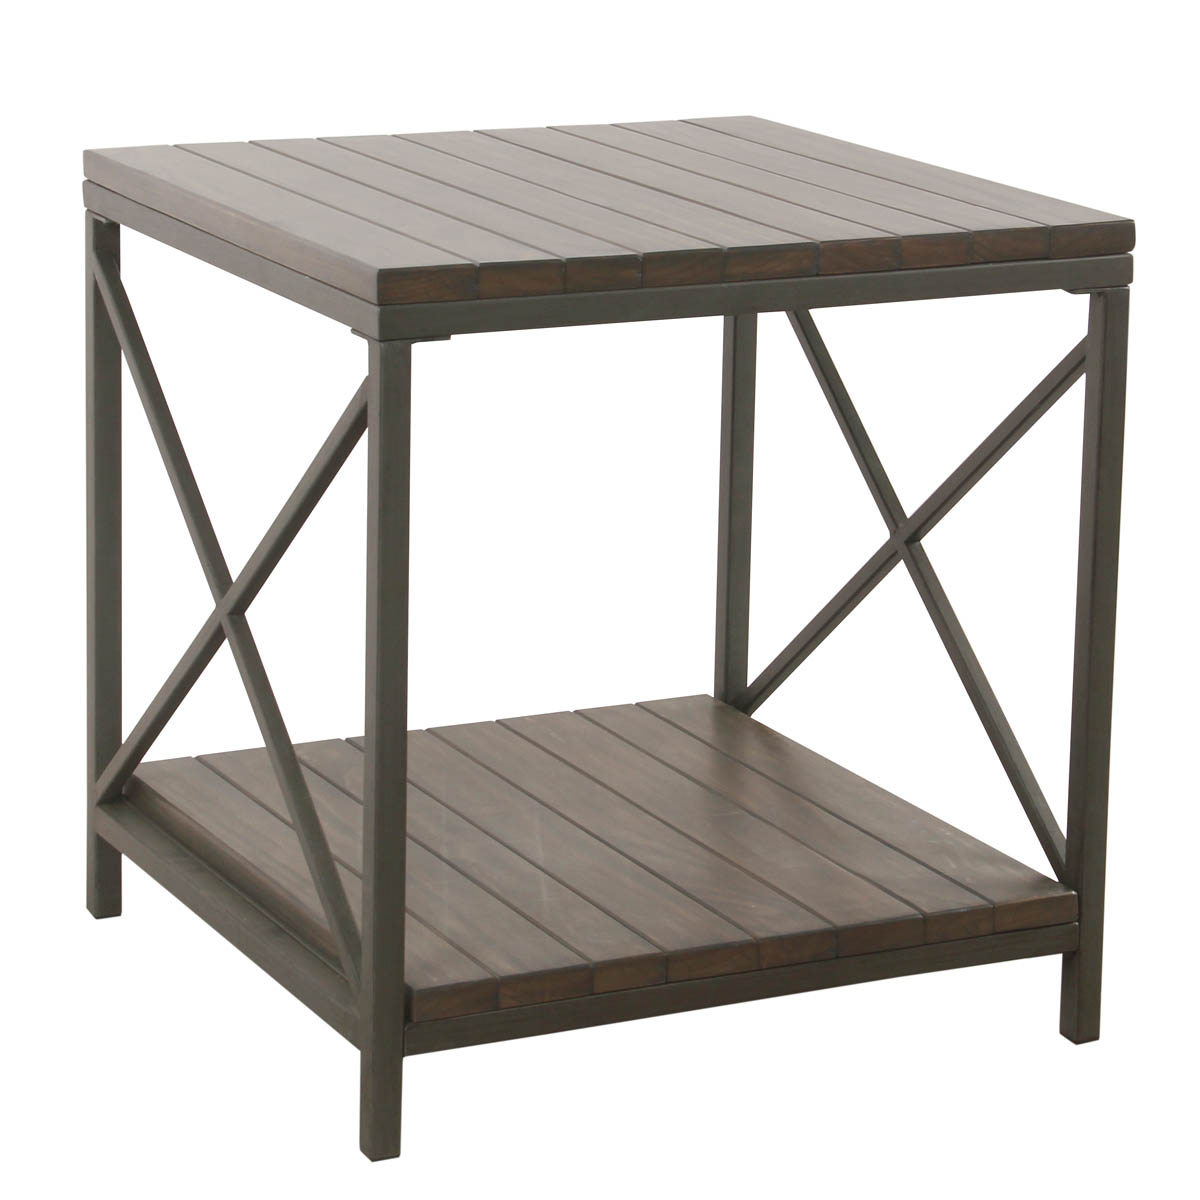 leather coffee table probably outrageous amazing gray wood end homepop and metal accent patina front ikea storage baskets inch furniture legs white gold runner fine tables corner